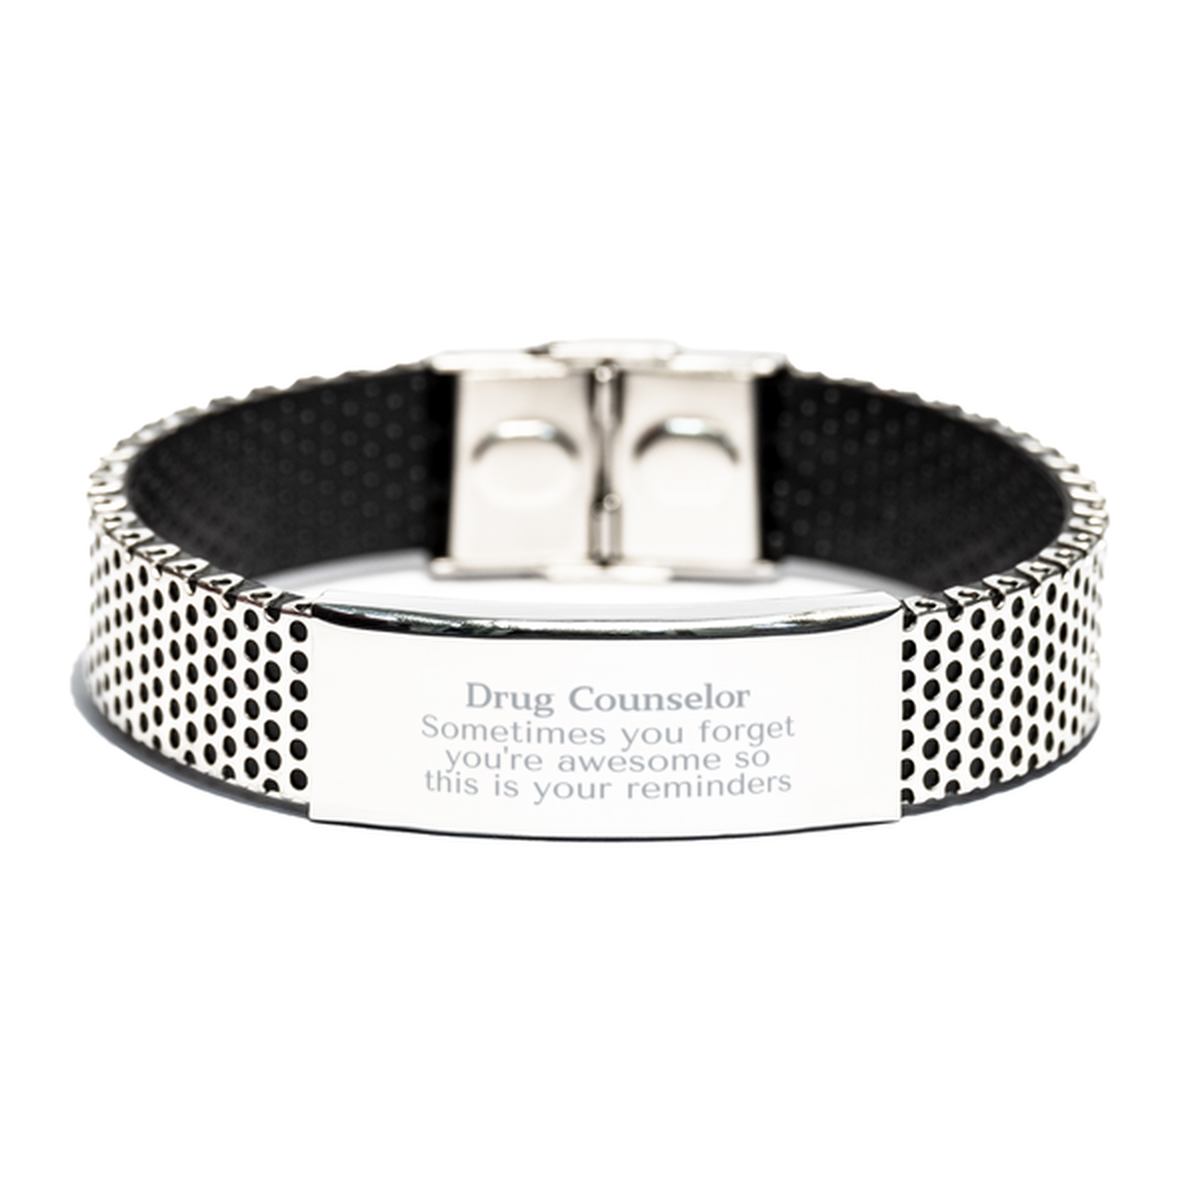 Sentimental Drug Counselor Stainless Steel Bracelet, Drug Counselor Sometimes you forget you're awesome so this is your reminders, Graduation Christmas Birthday Gifts for Drug Counselor, Men, Women, Coworkers